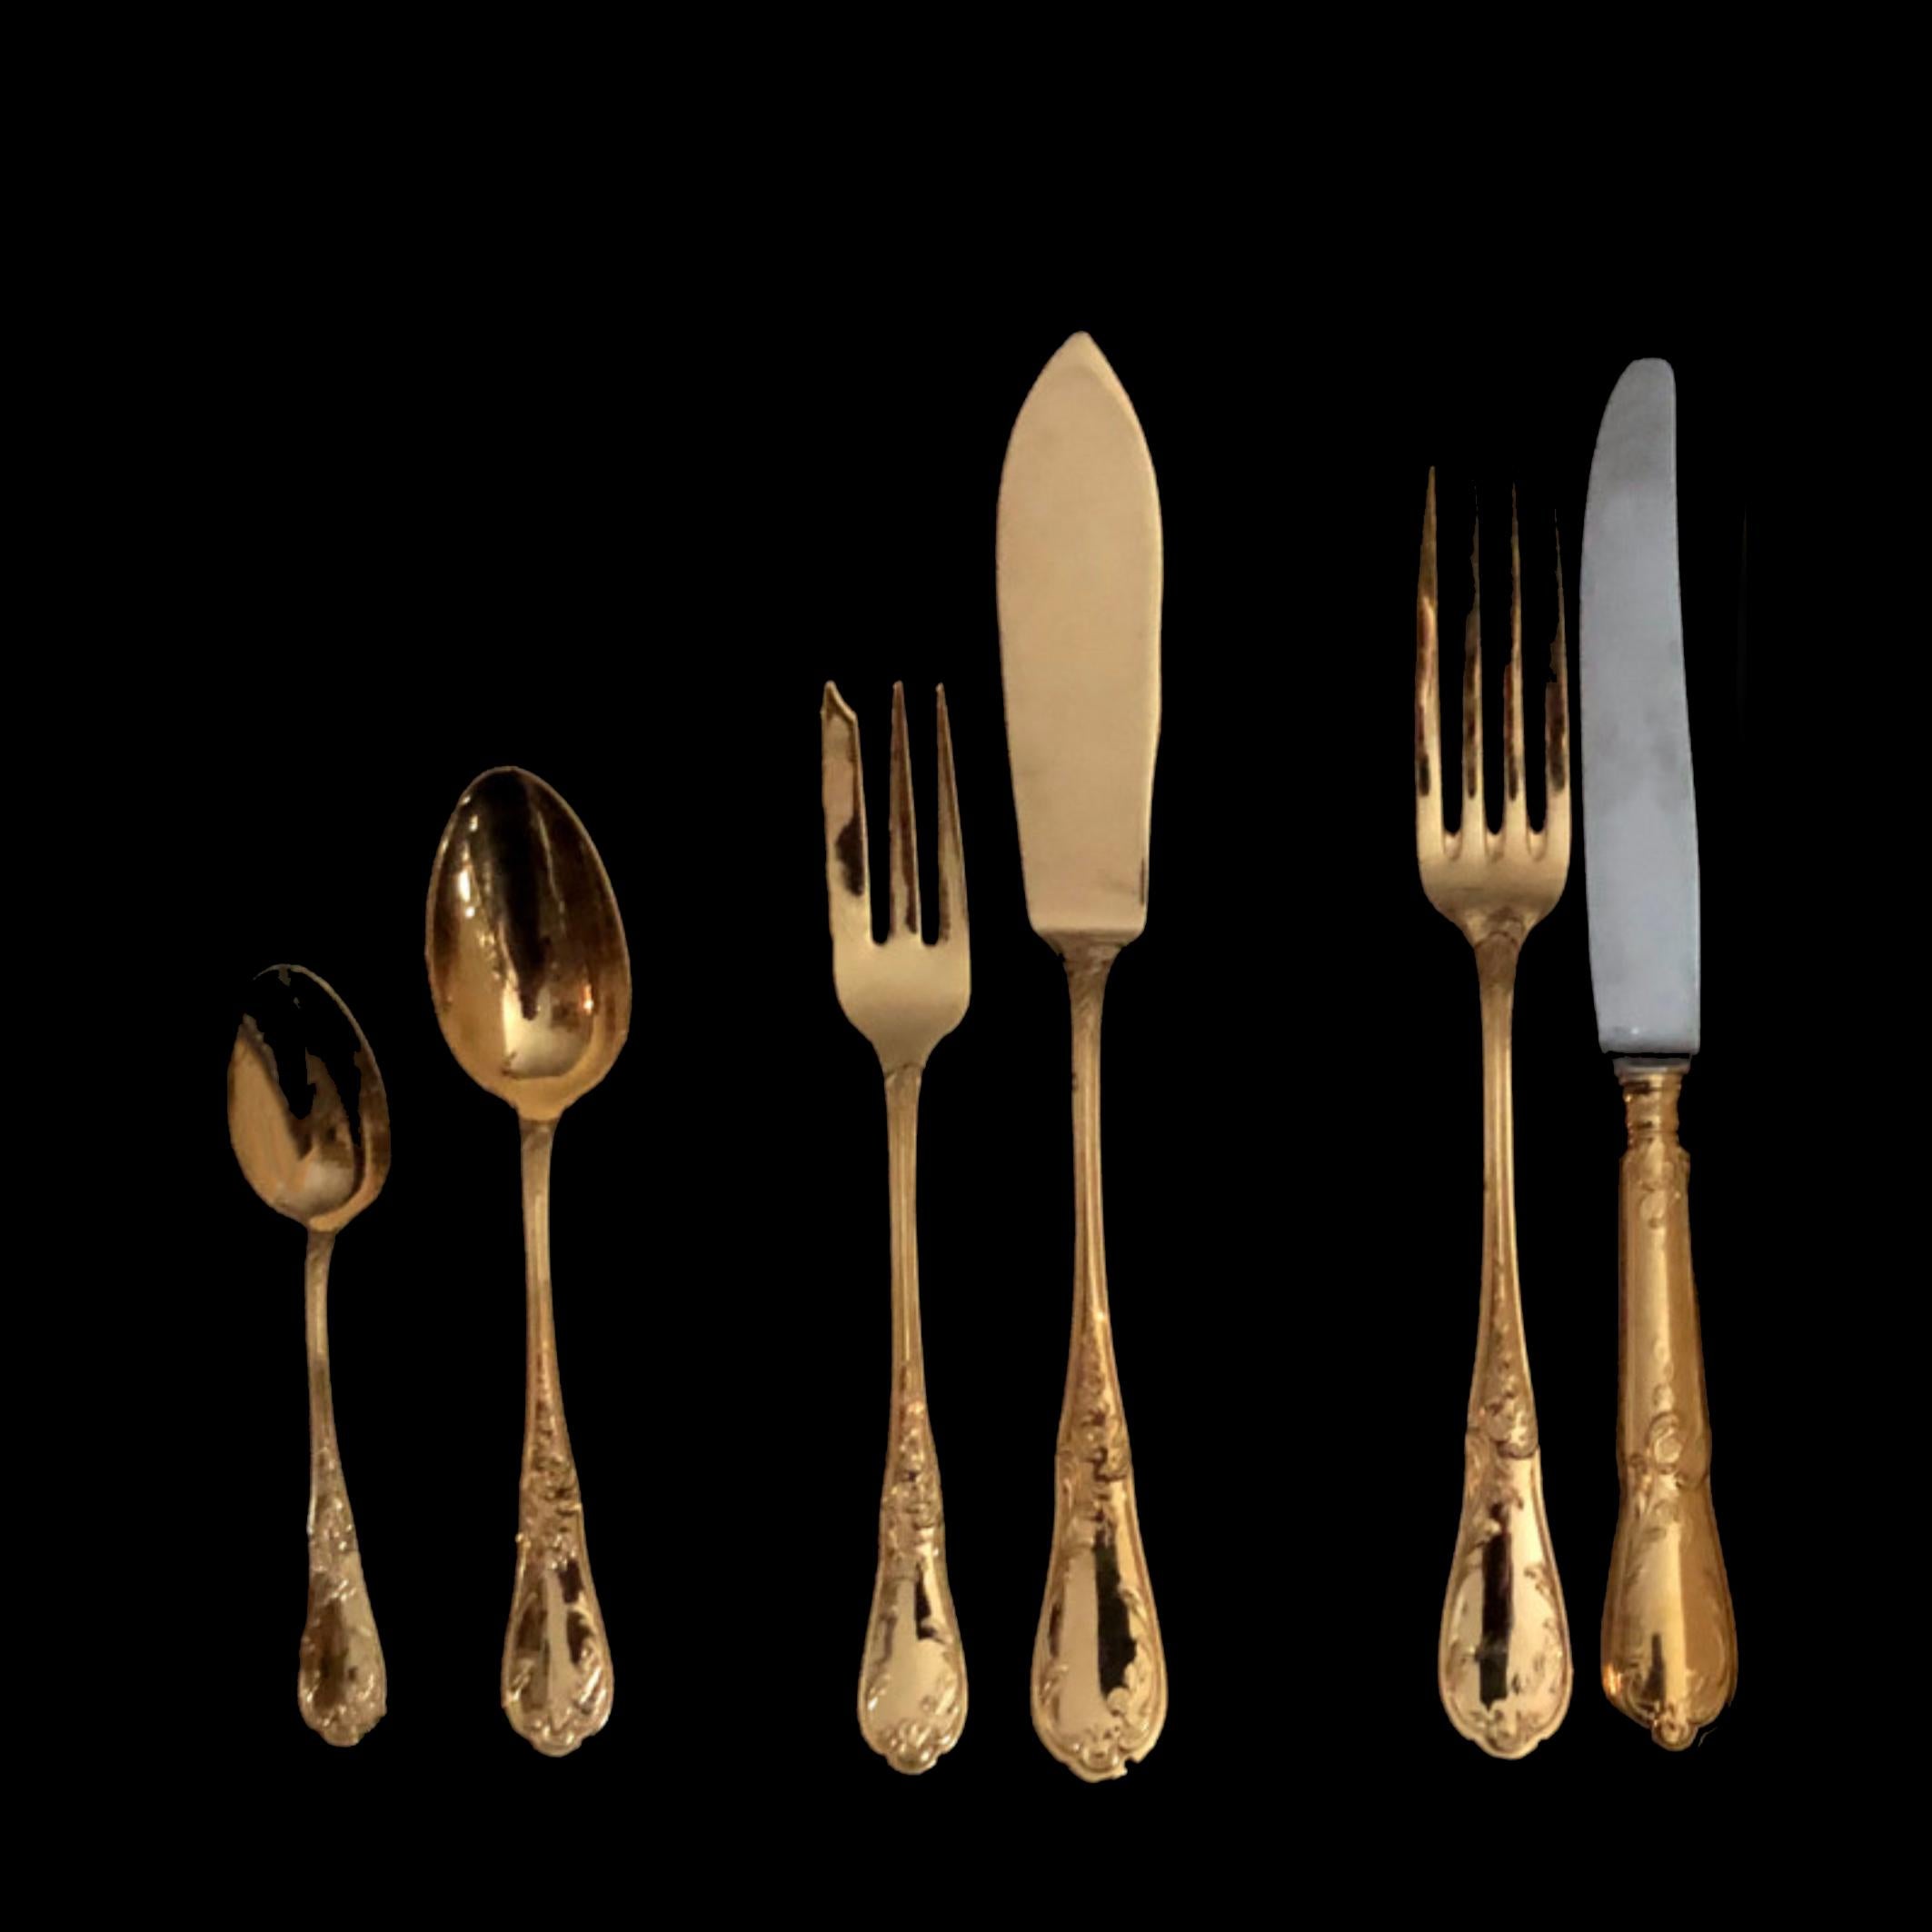 Romantic French Gilded Flatware Called 